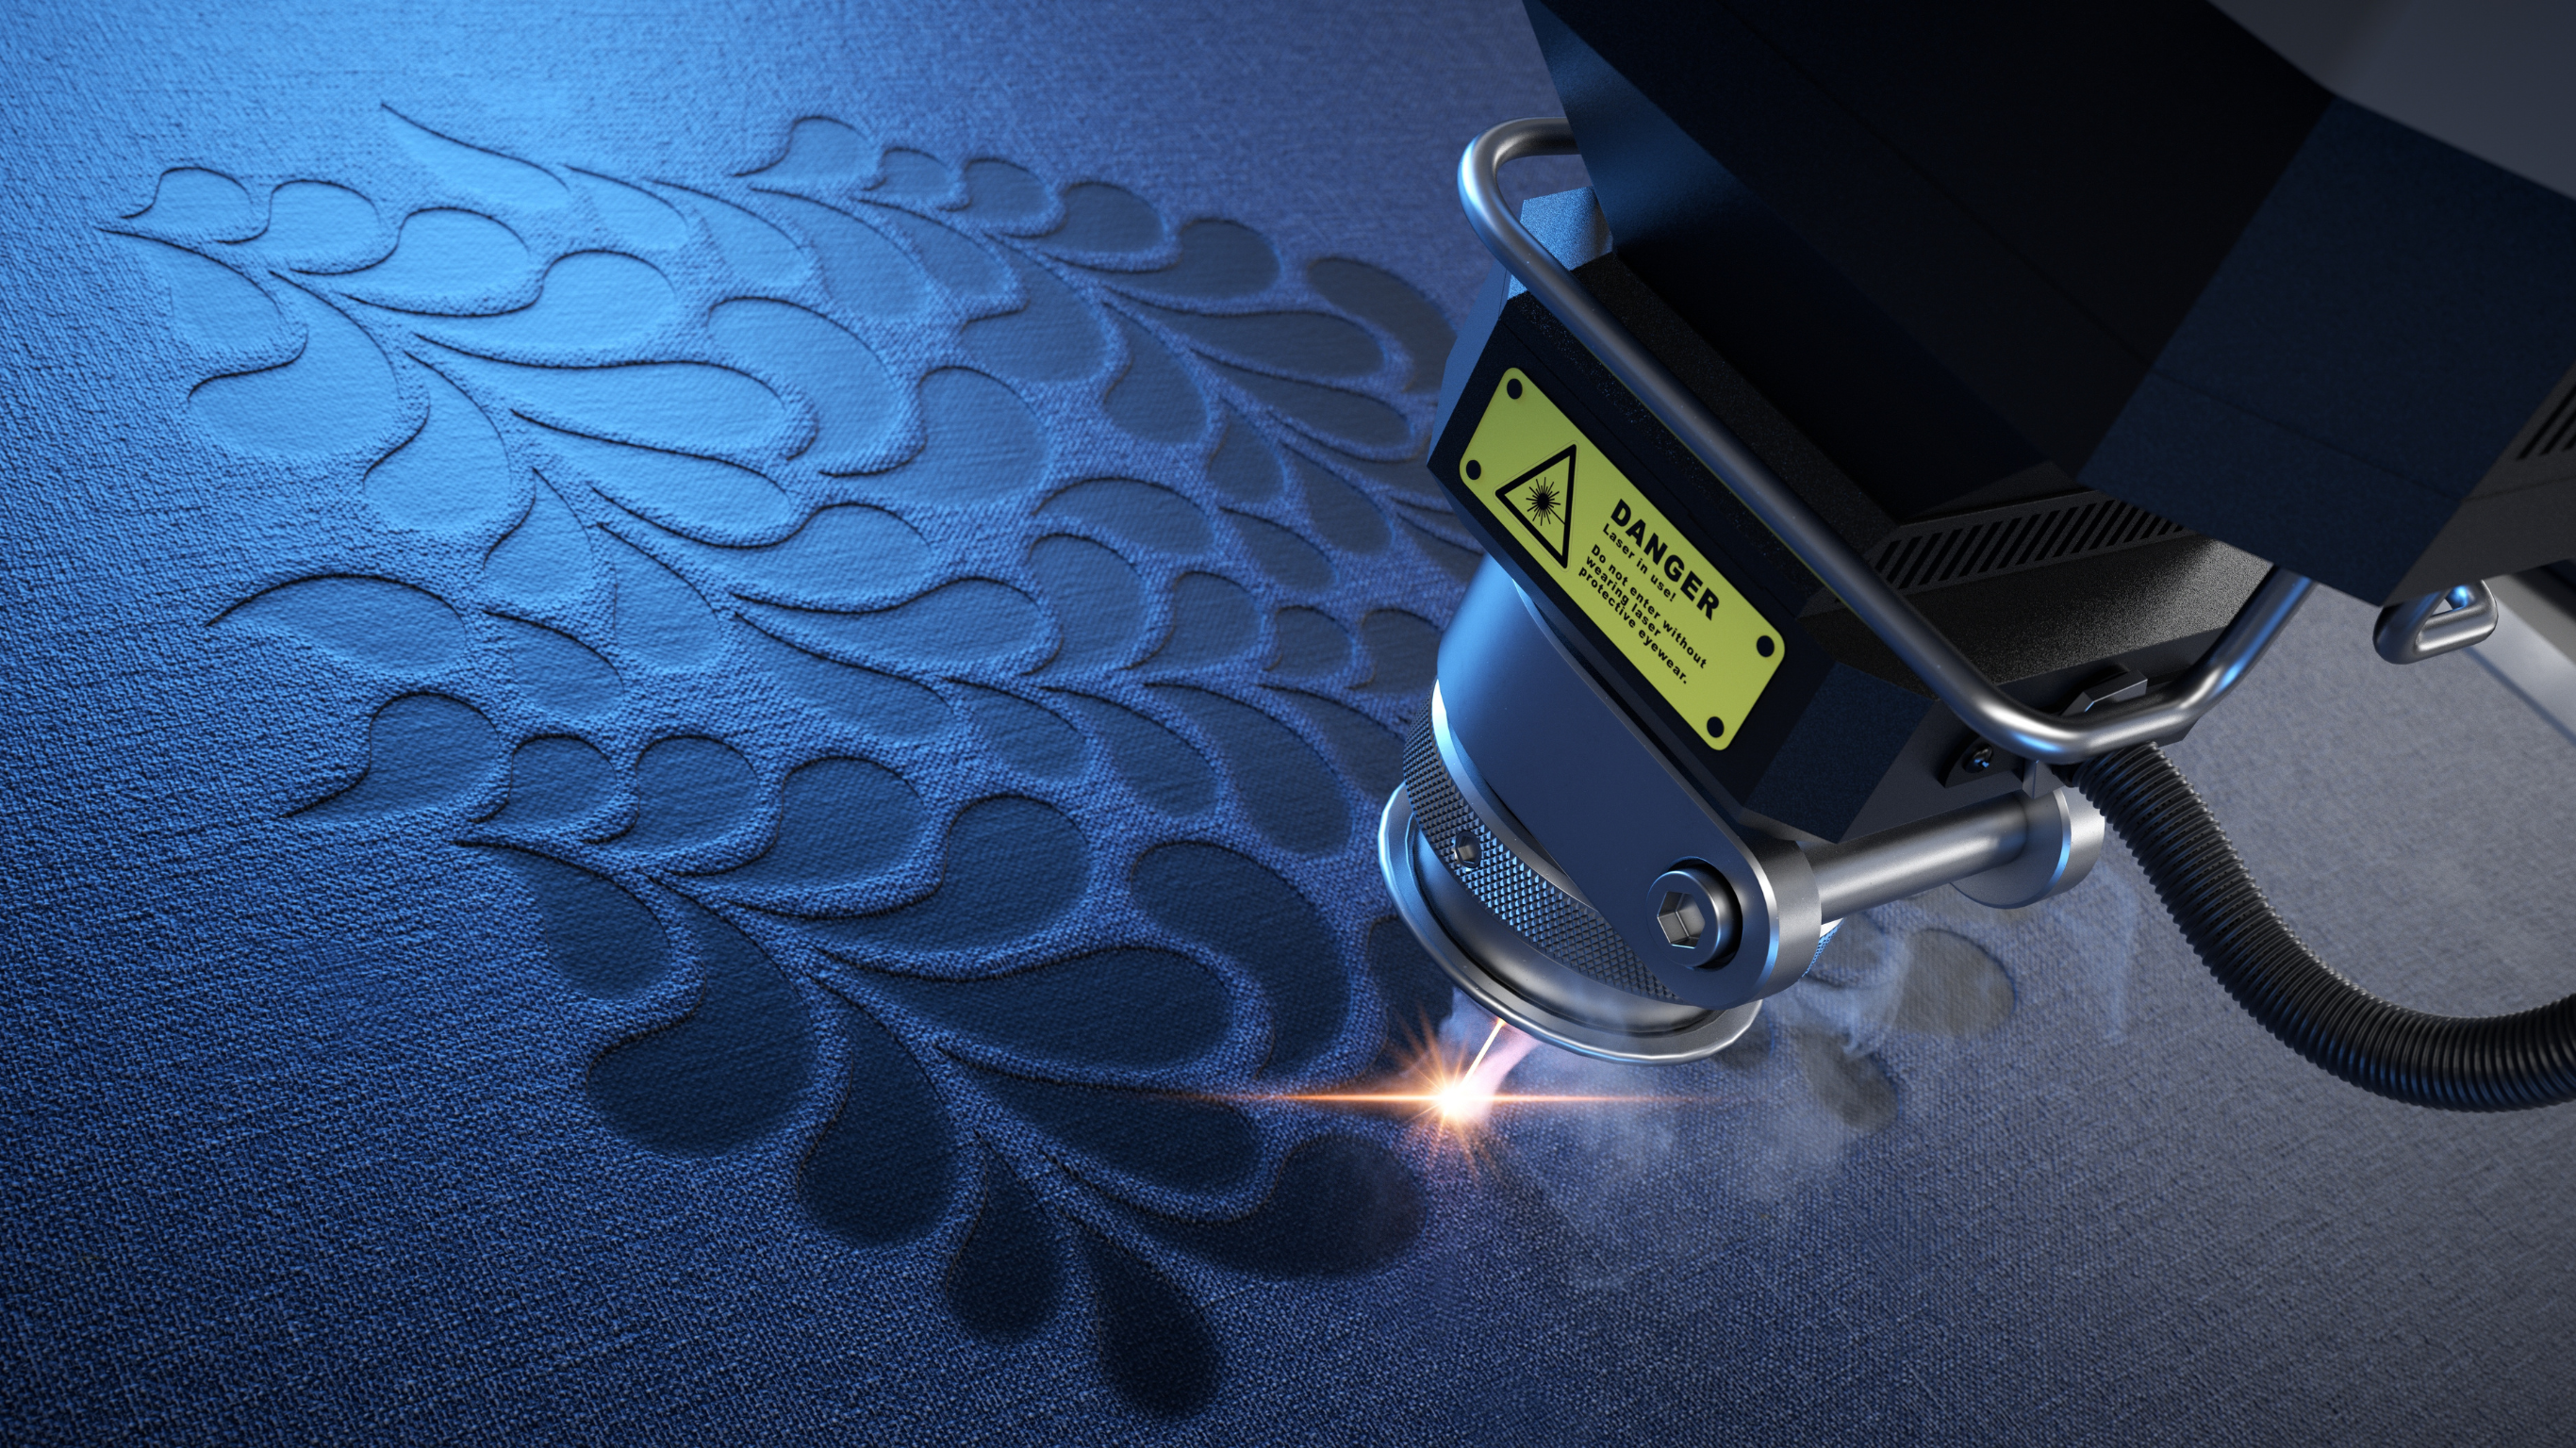 laser engraving machine creating pattern on solid material